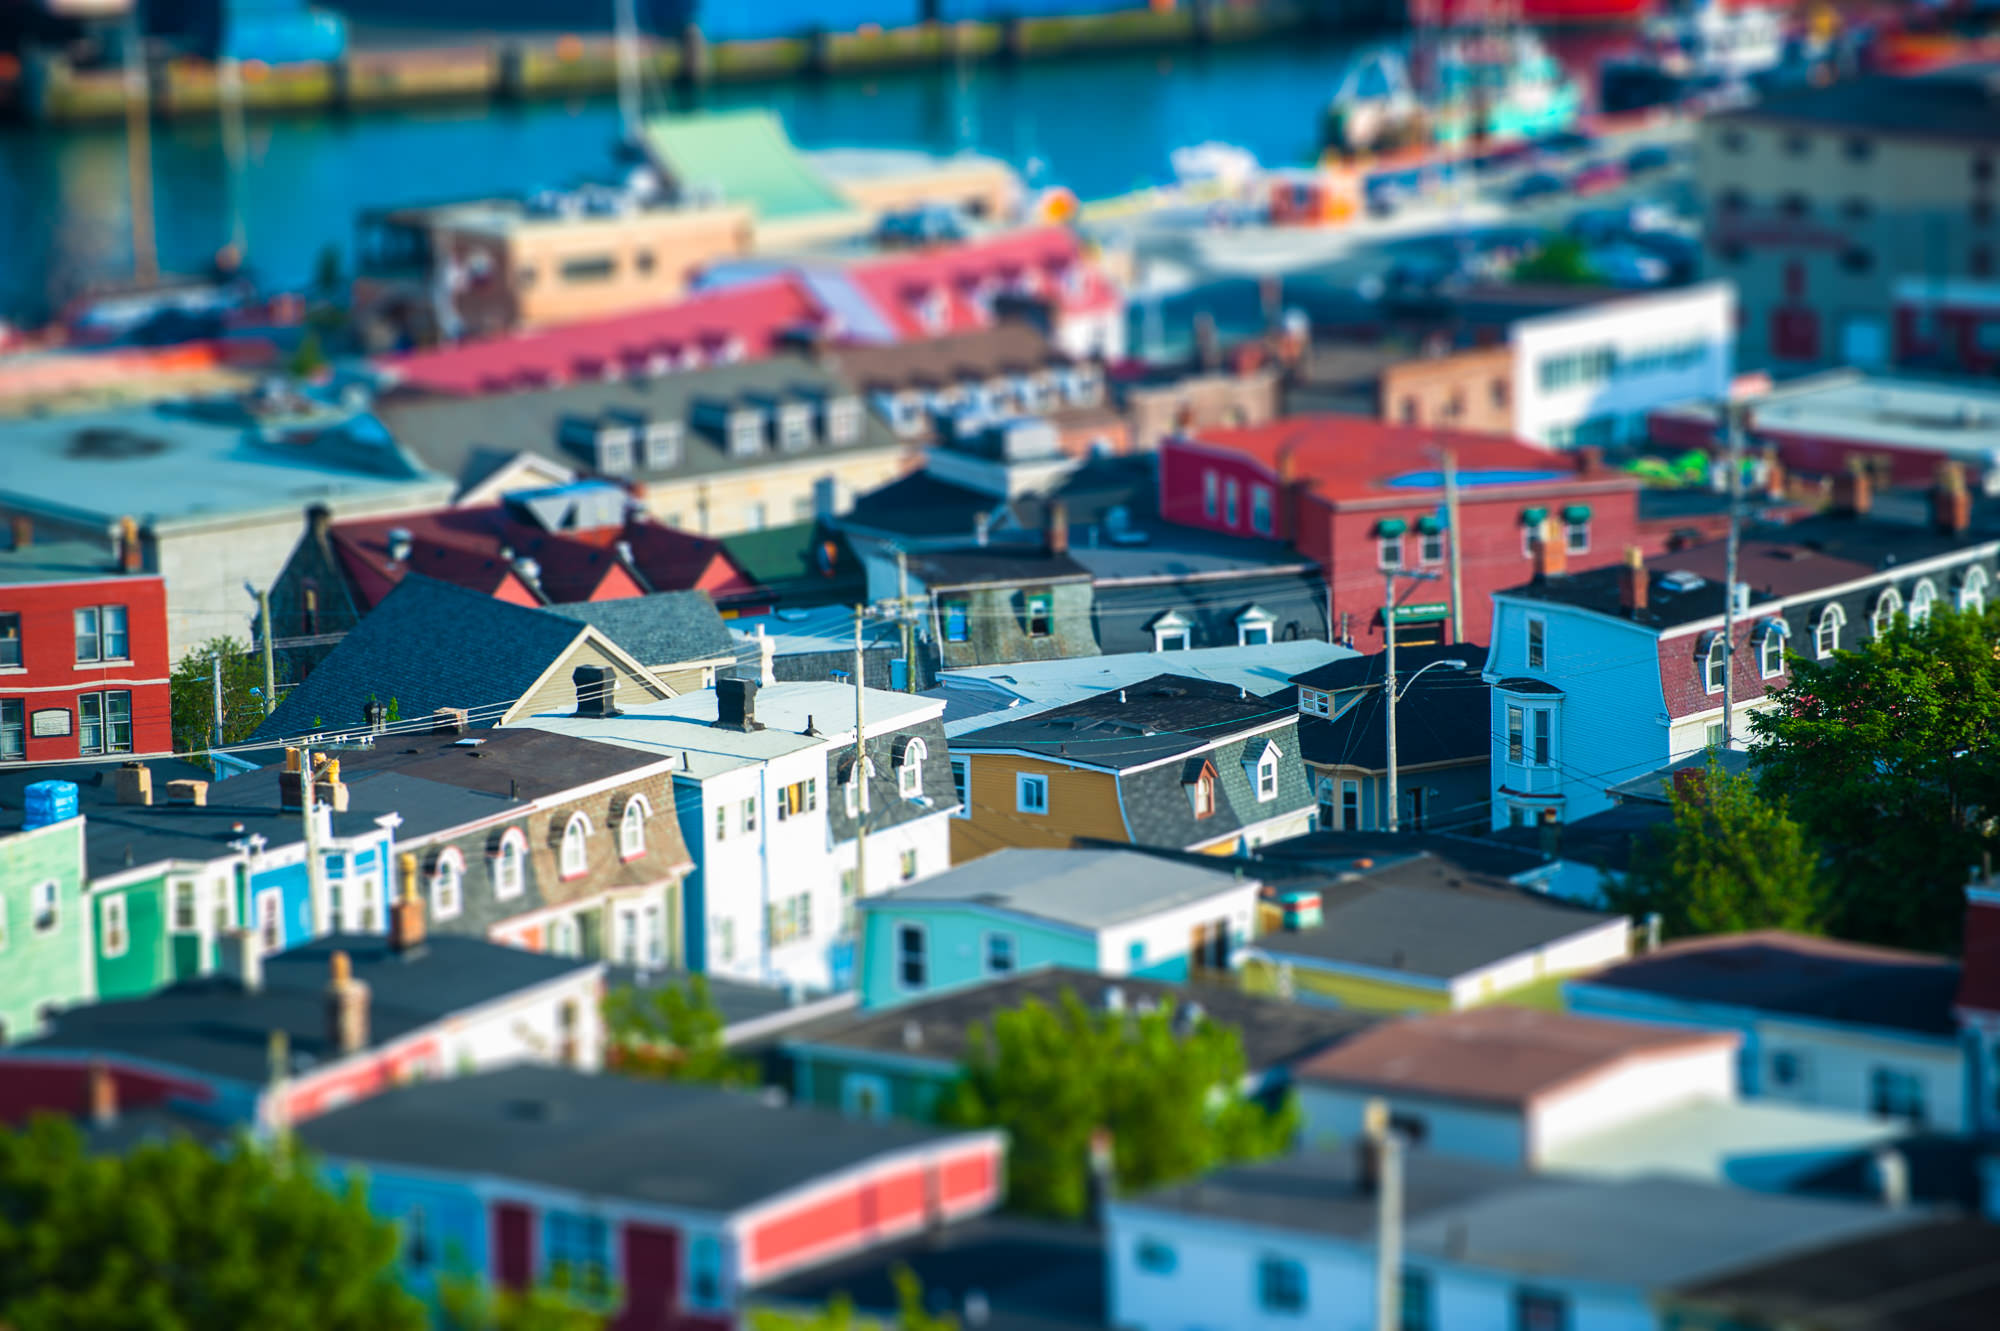 Nothing says St. John's like little colorful houses dotting the streets.